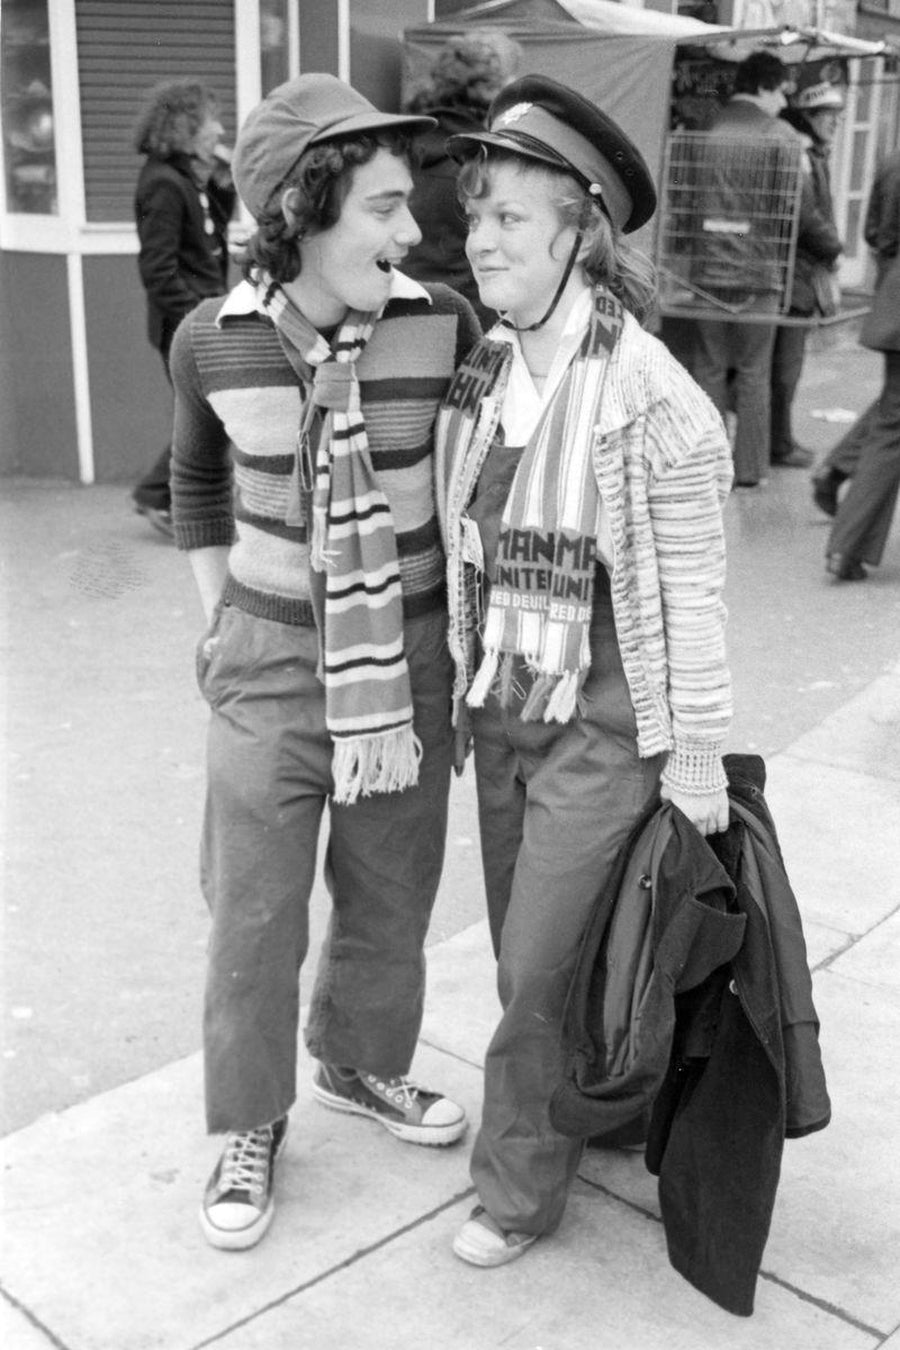 Two Manchester United Football Fans by Iain S.P. Reid, c. 1977